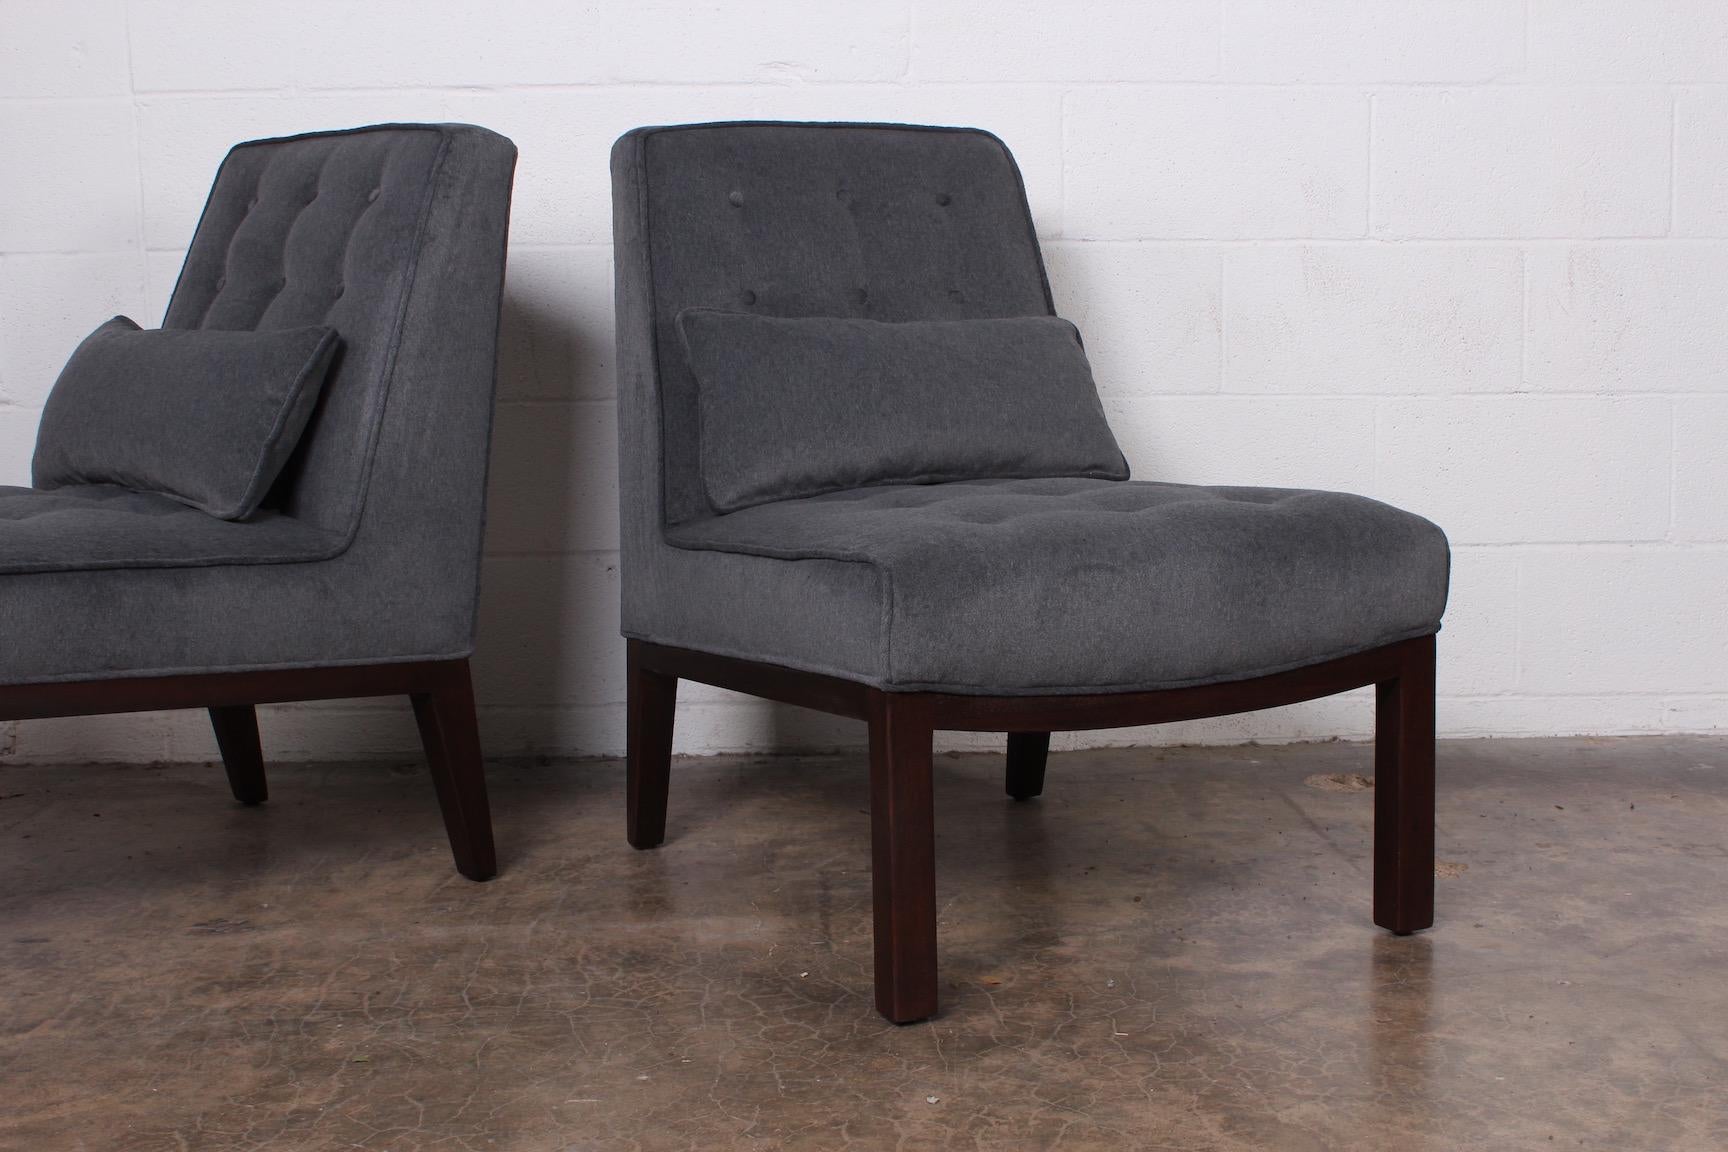 Pair of Slipper Chairs by Edward Wormley for Dunbar In Excellent Condition In Dallas, TX